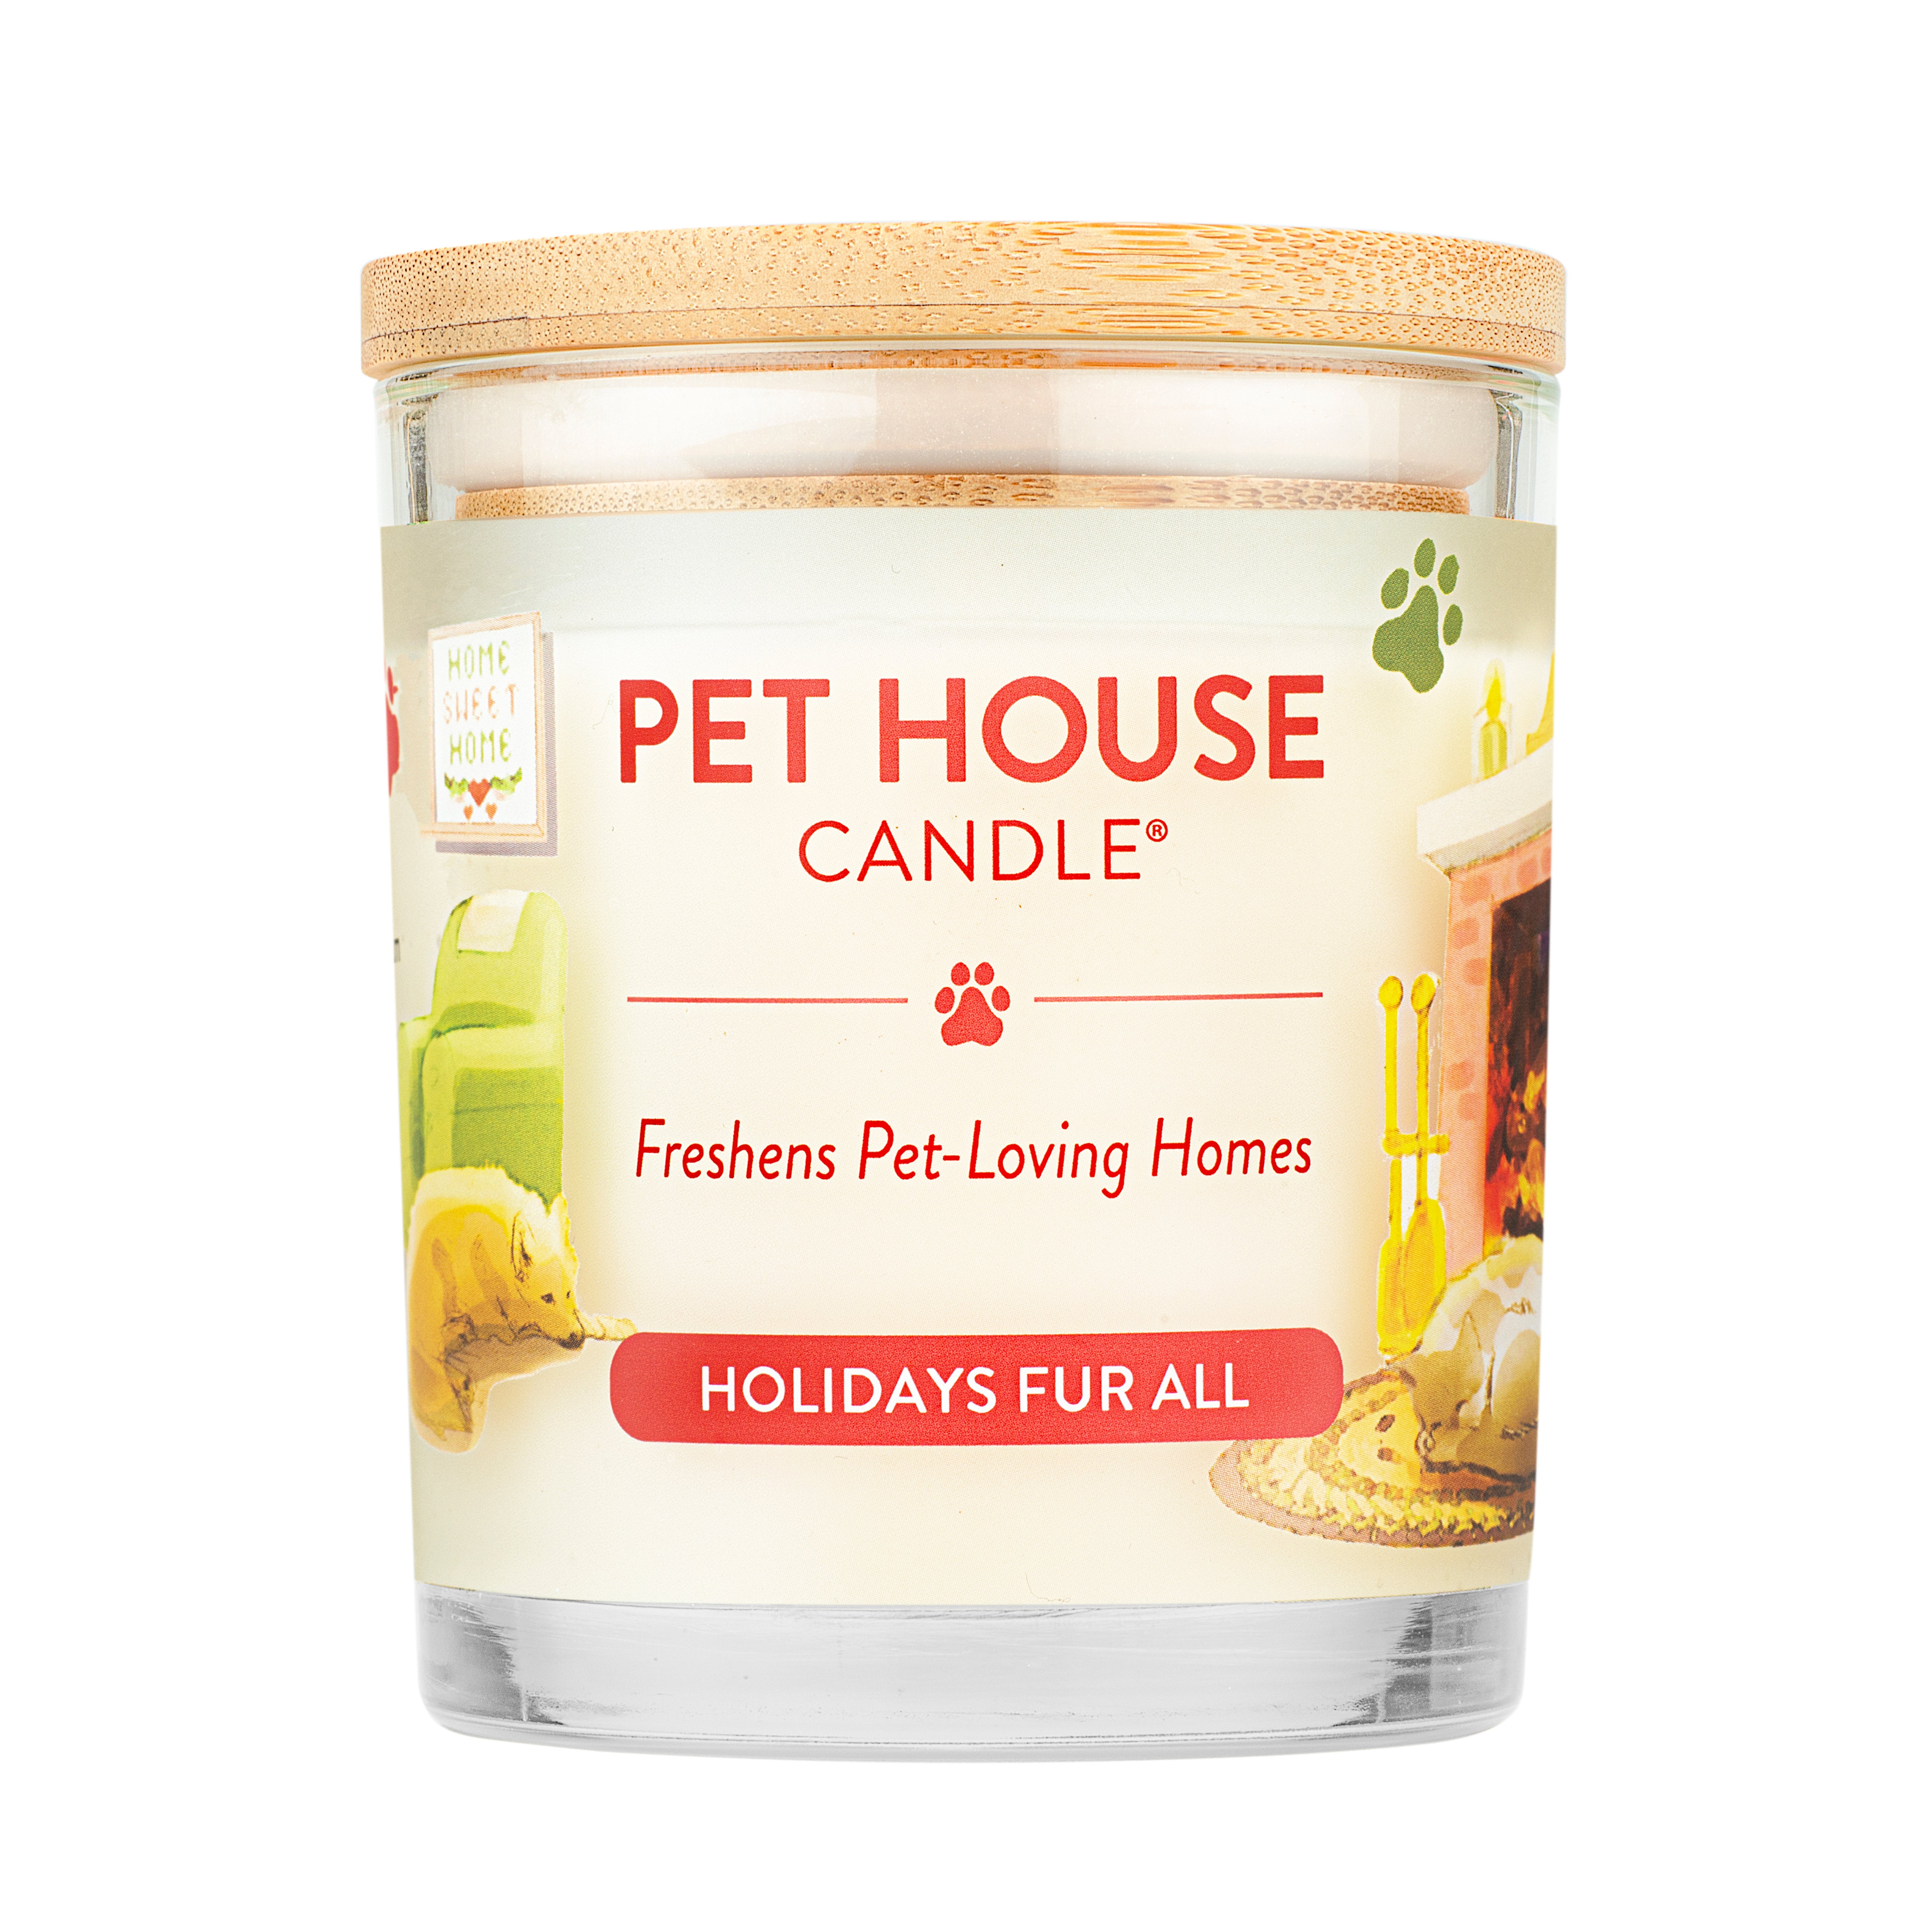 Holidays Fur All Candle